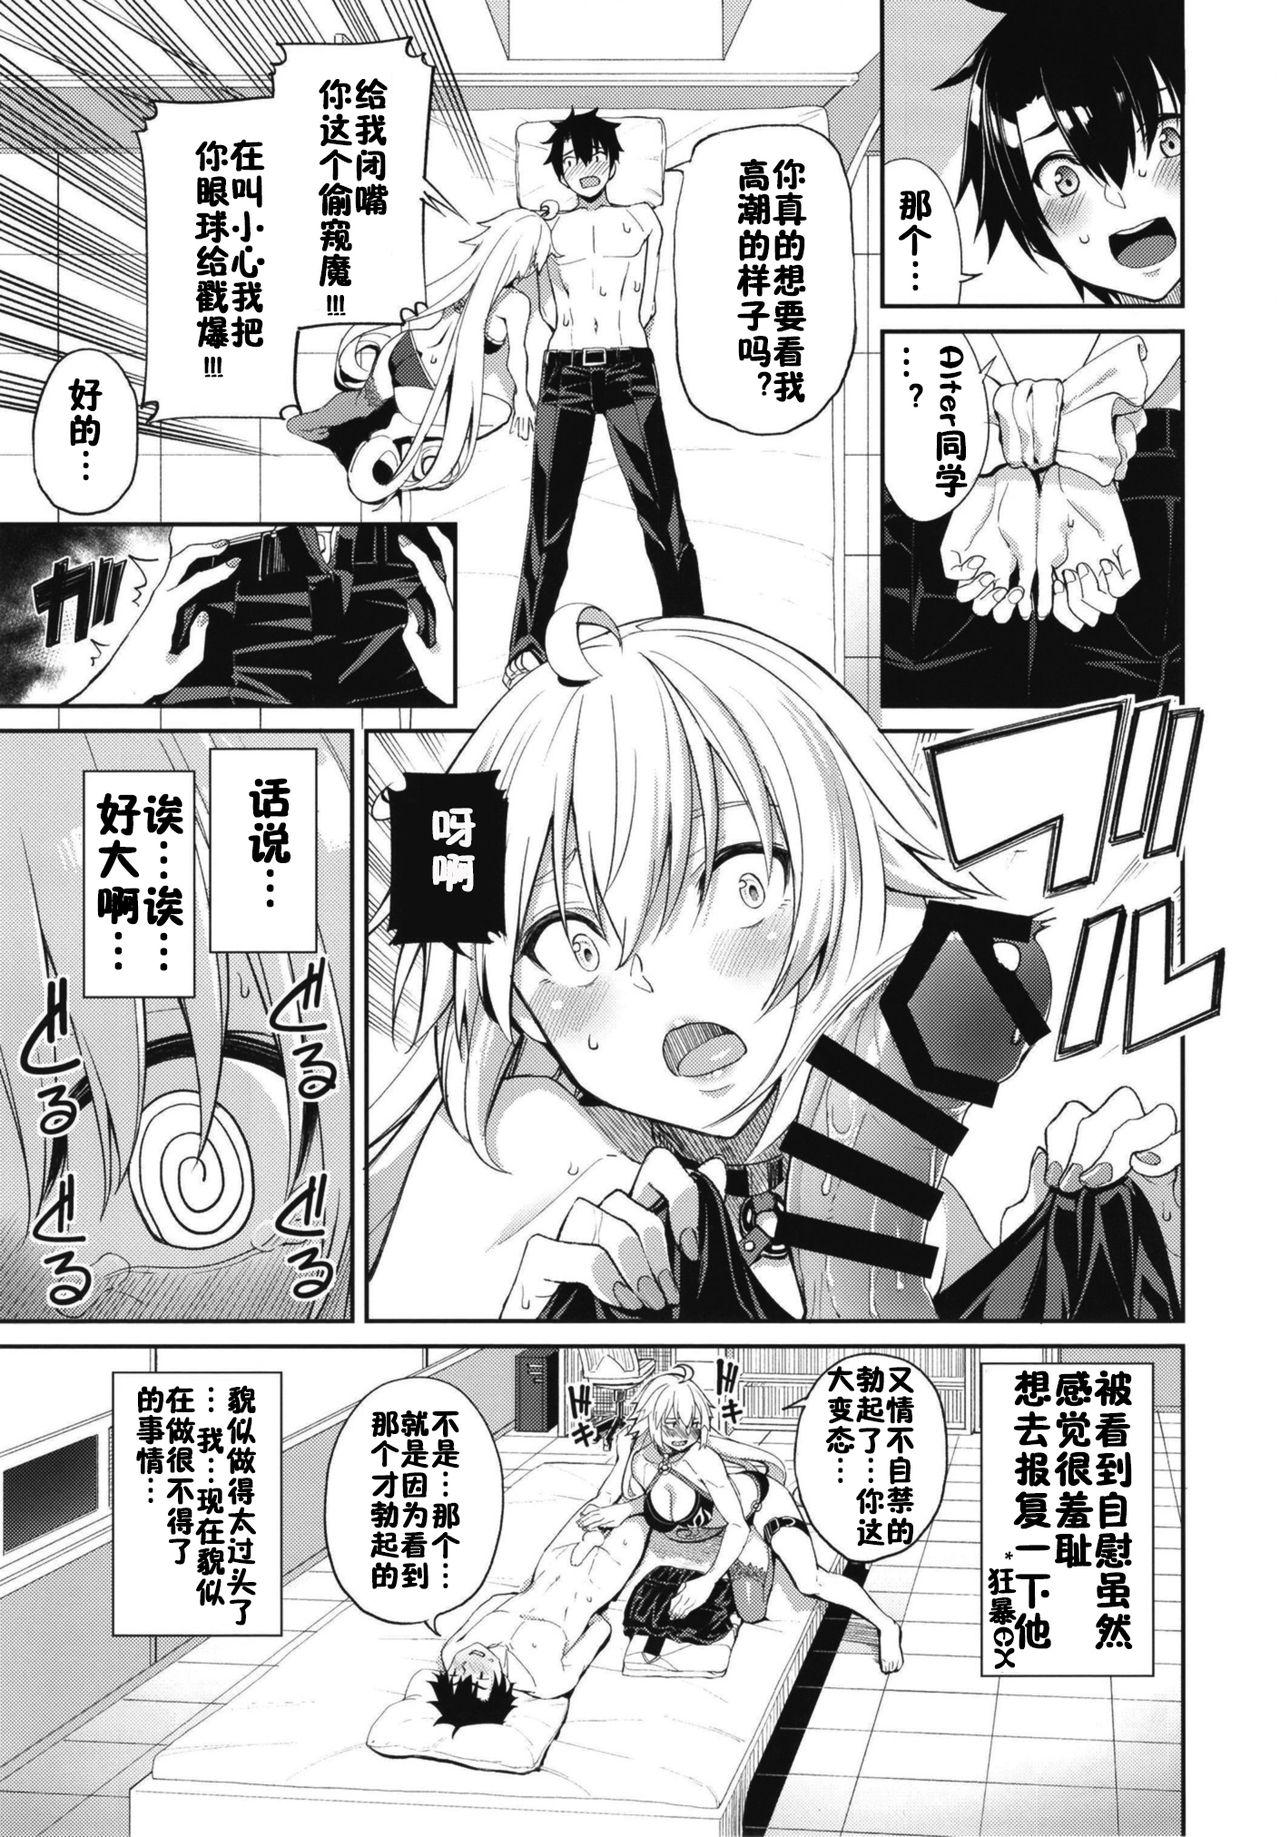 Spying Jeanne no Shitto - Fate grand order Teenage Porn - Page 9